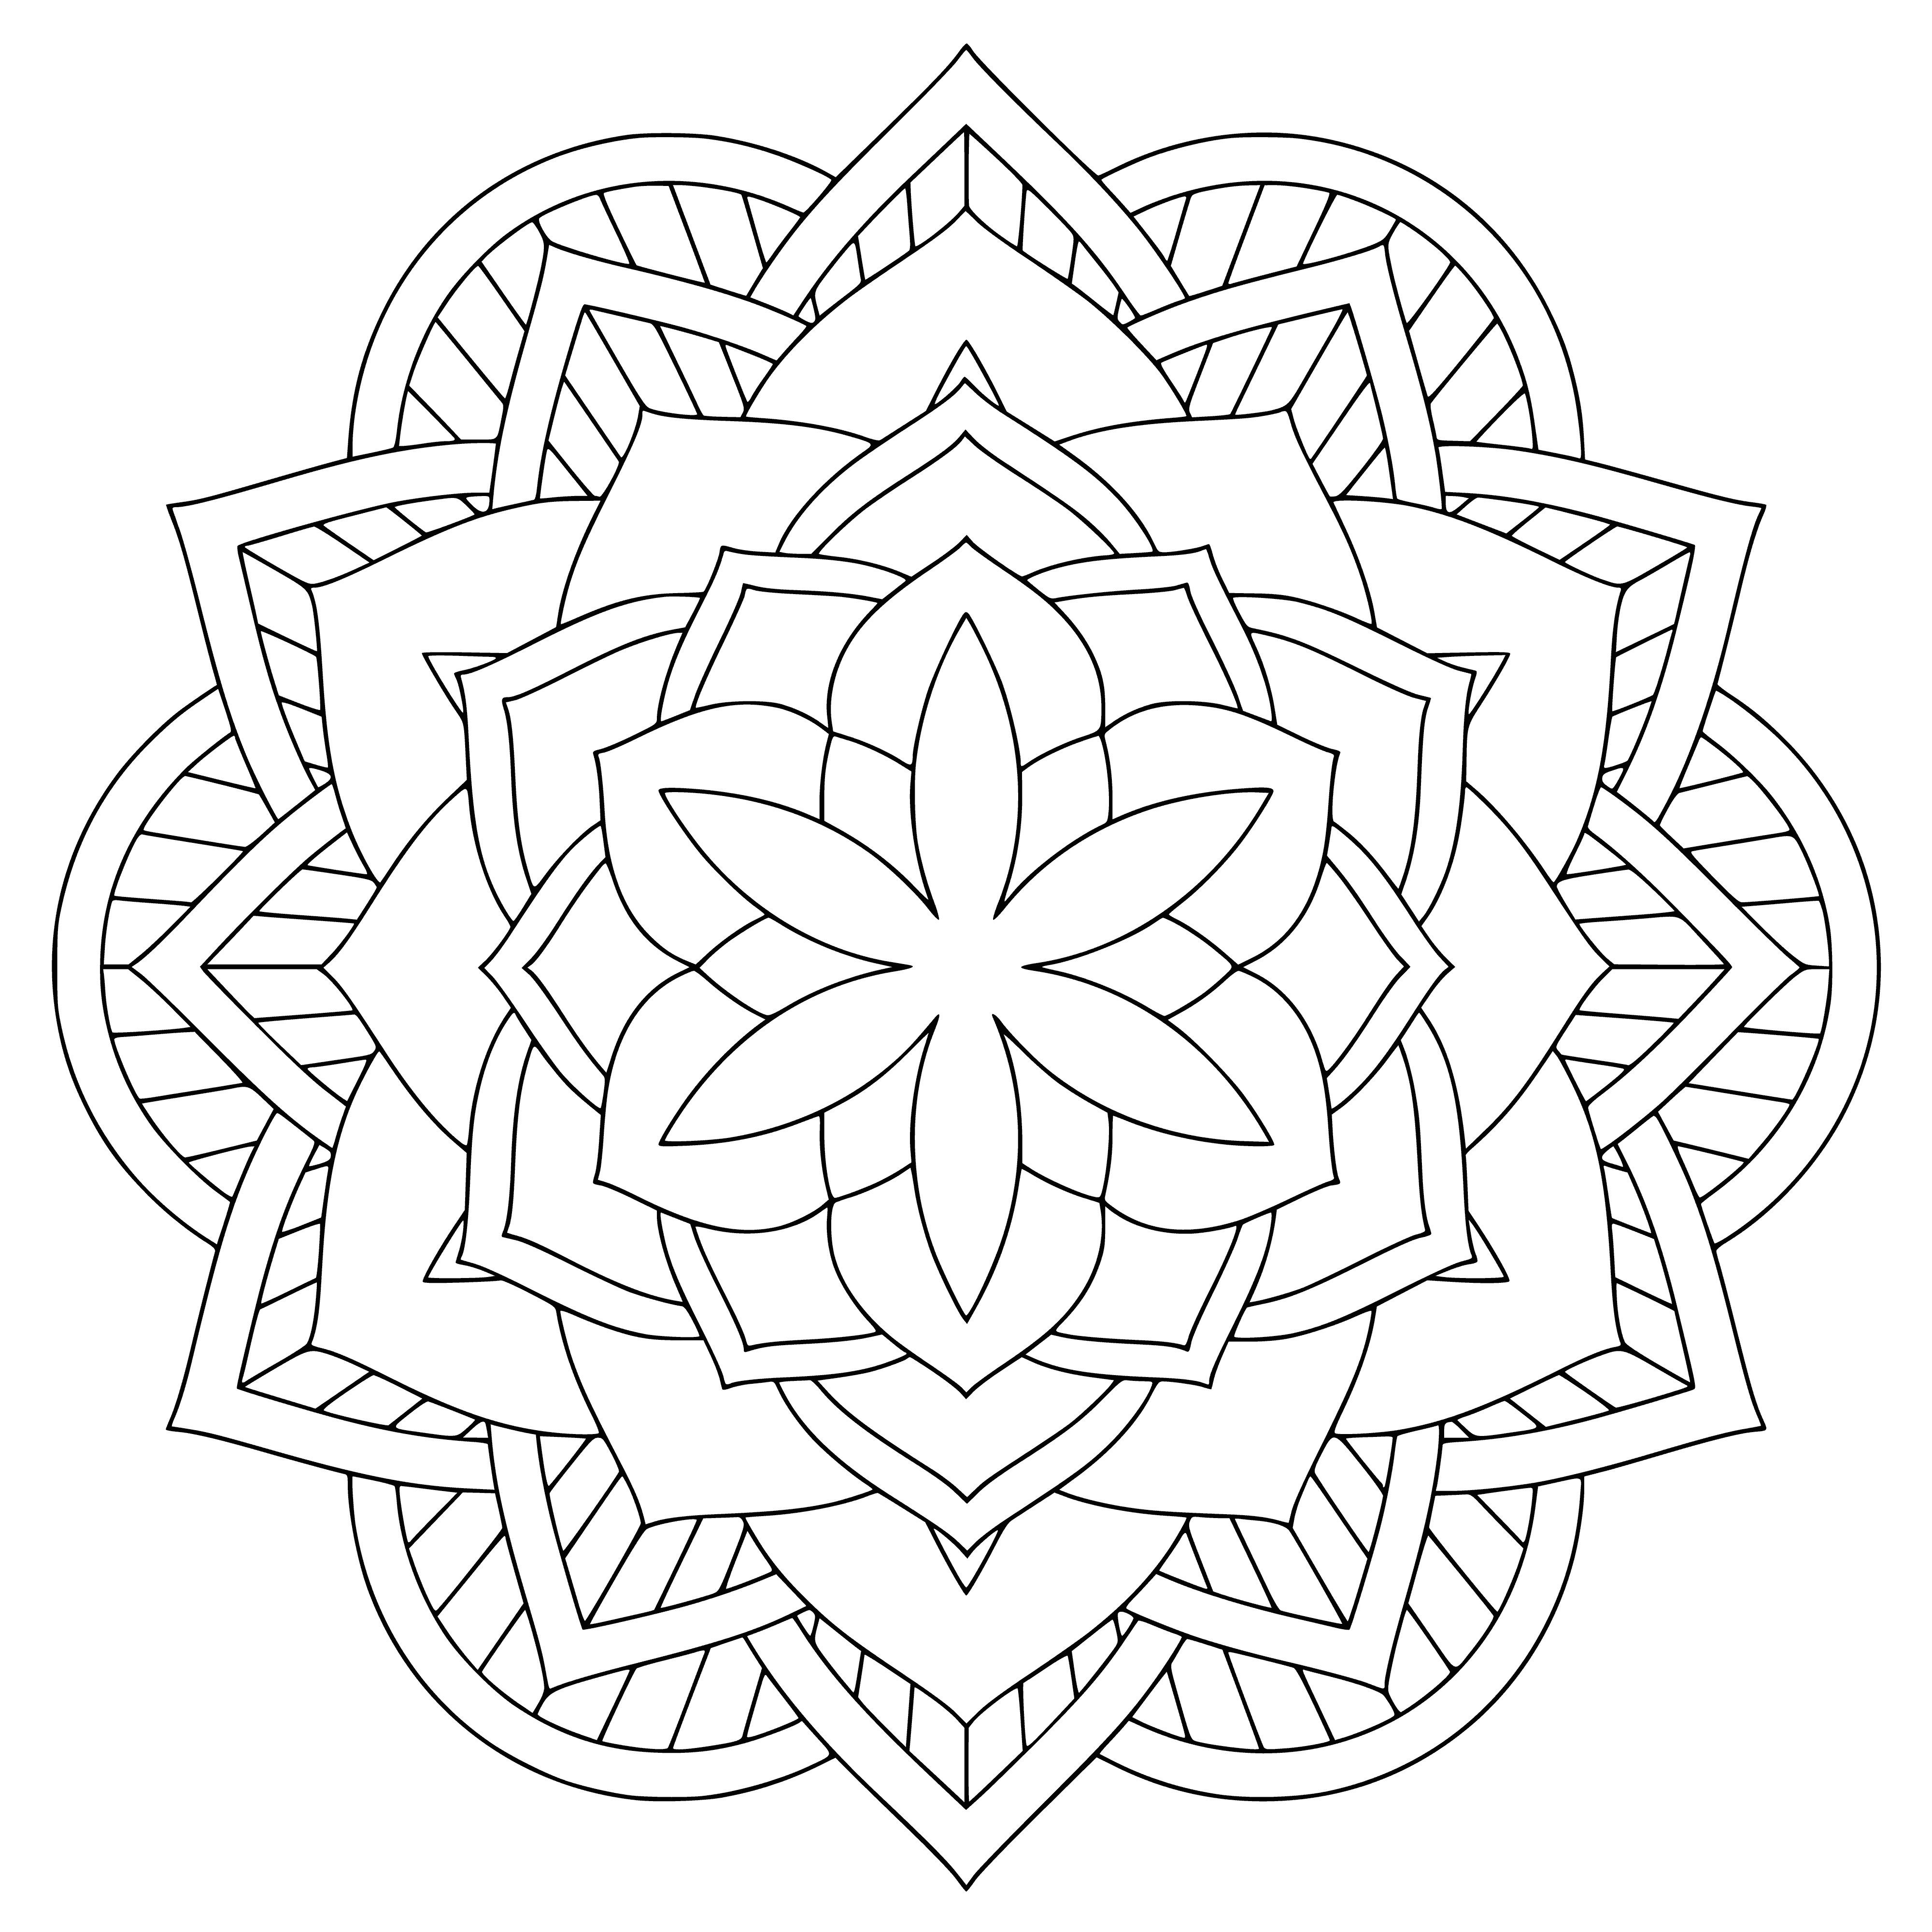 coloring page: Colorful flower mandala coloring page with a big flower center and smaller flowers around it - so many details to enjoy! #coloring #flowers